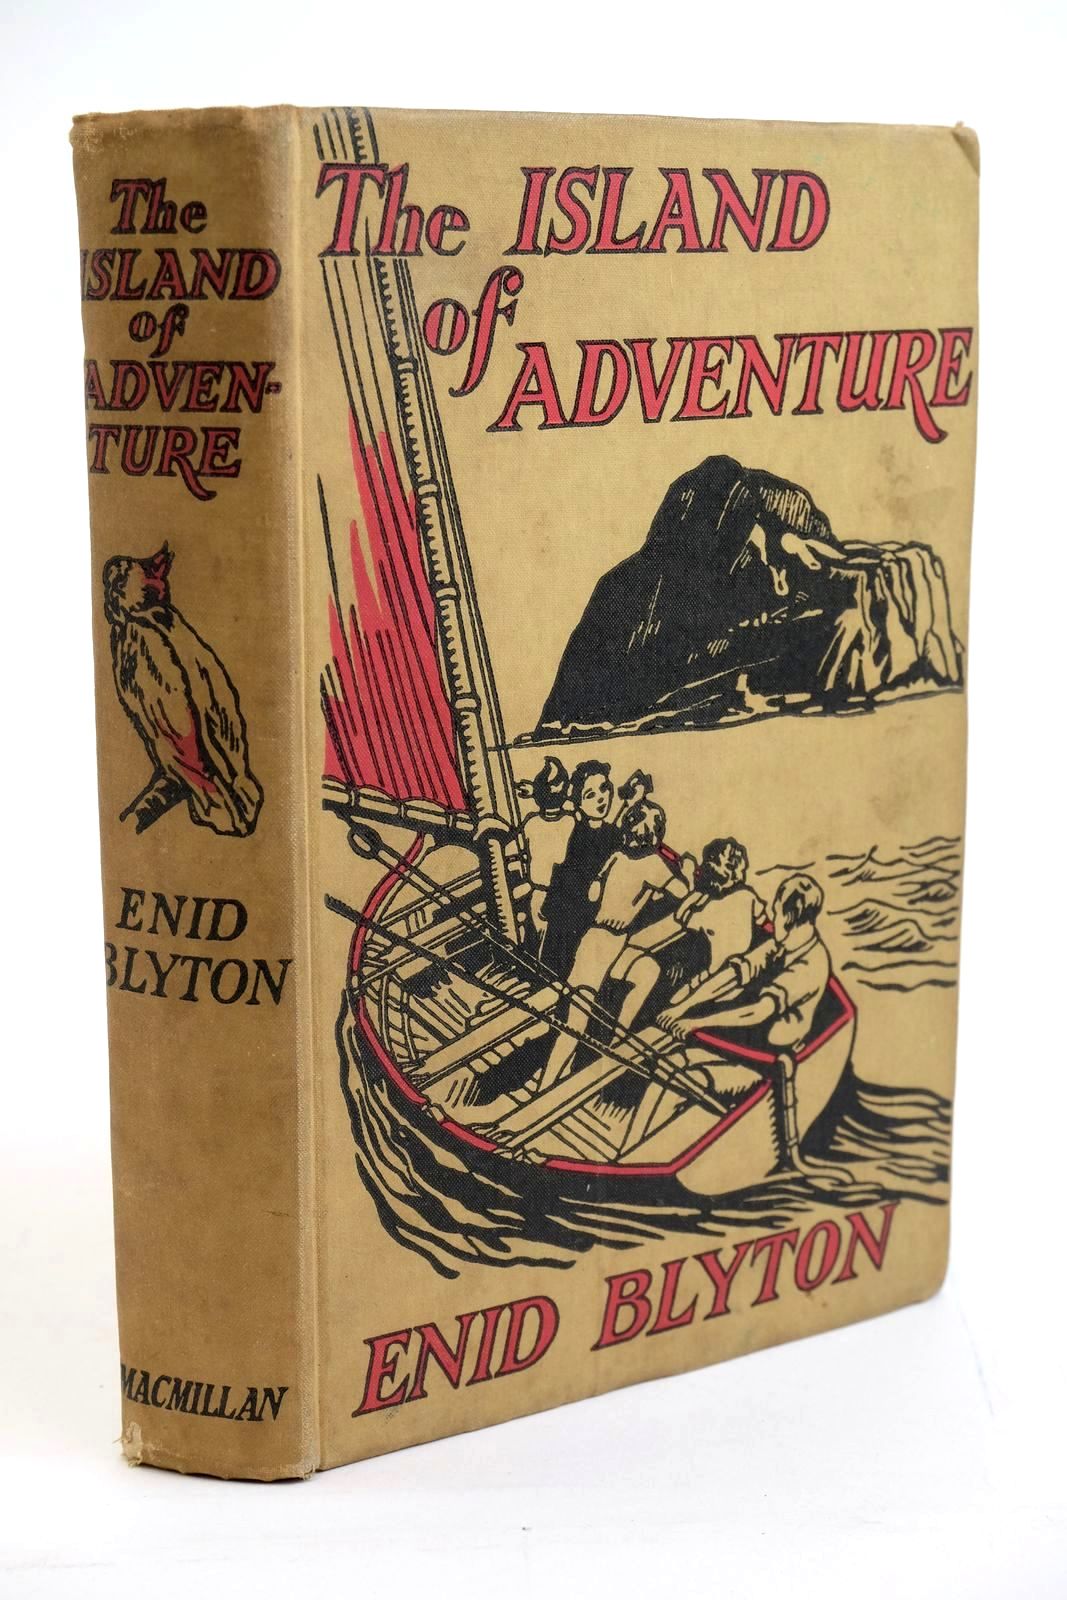 Photo of THE ISLAND OF ADVENTURE written by Blyton, Enid illustrated by Tresilian, Stuart published by Macmillan & Co. Ltd. (STOCK CODE: 1321505)  for sale by Stella & Rose's Books